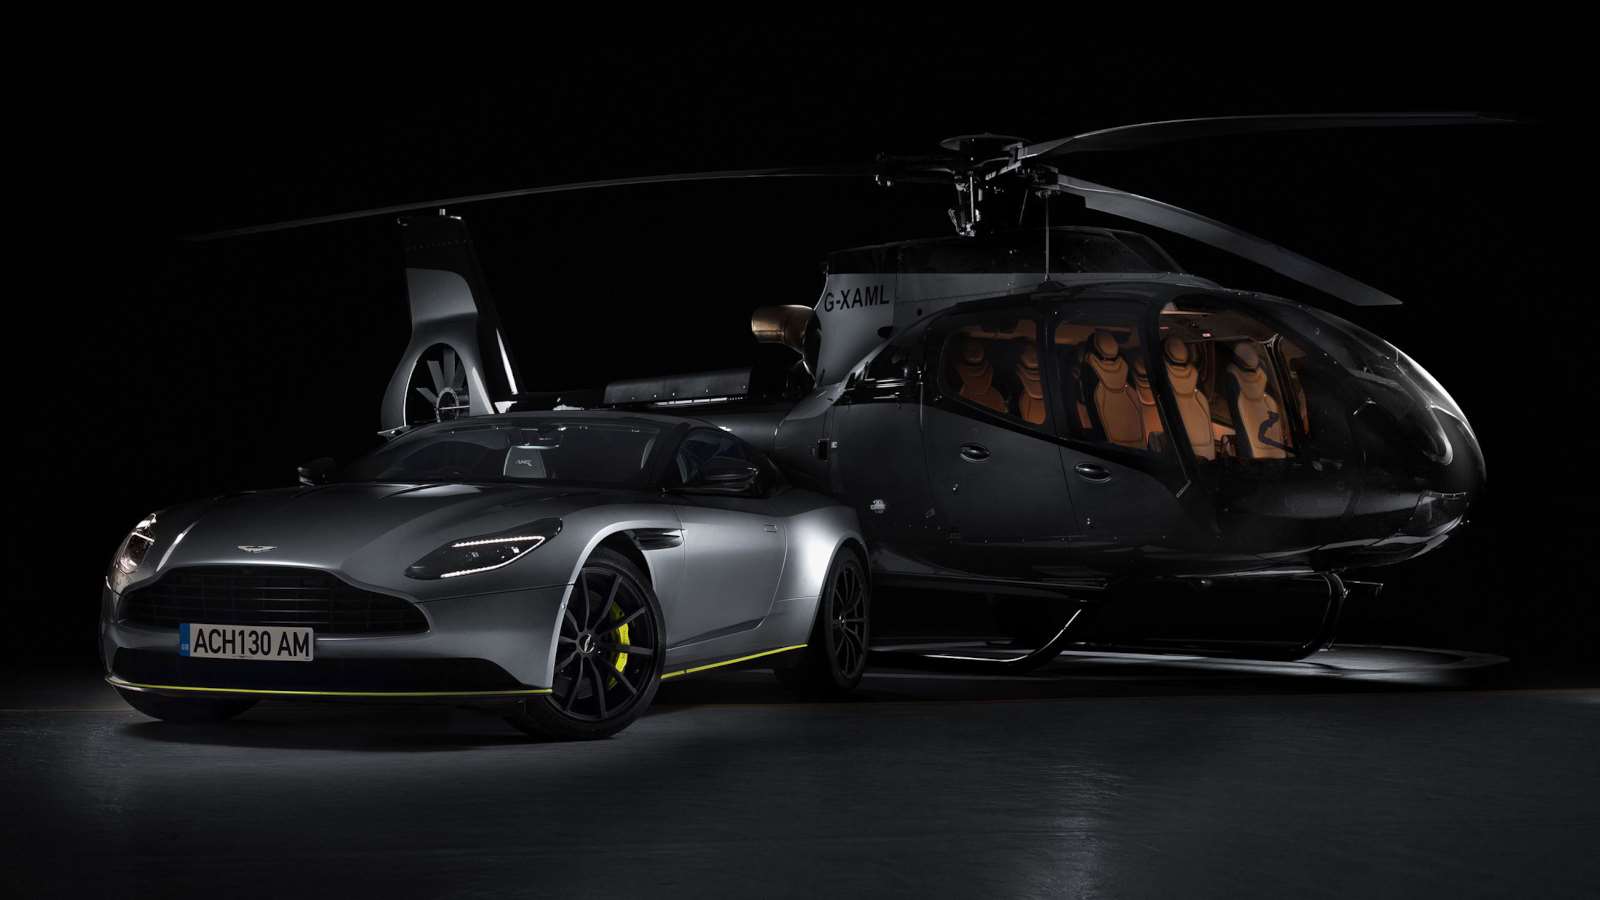 You can now buy an Aston Martin helicopter to match your DB11